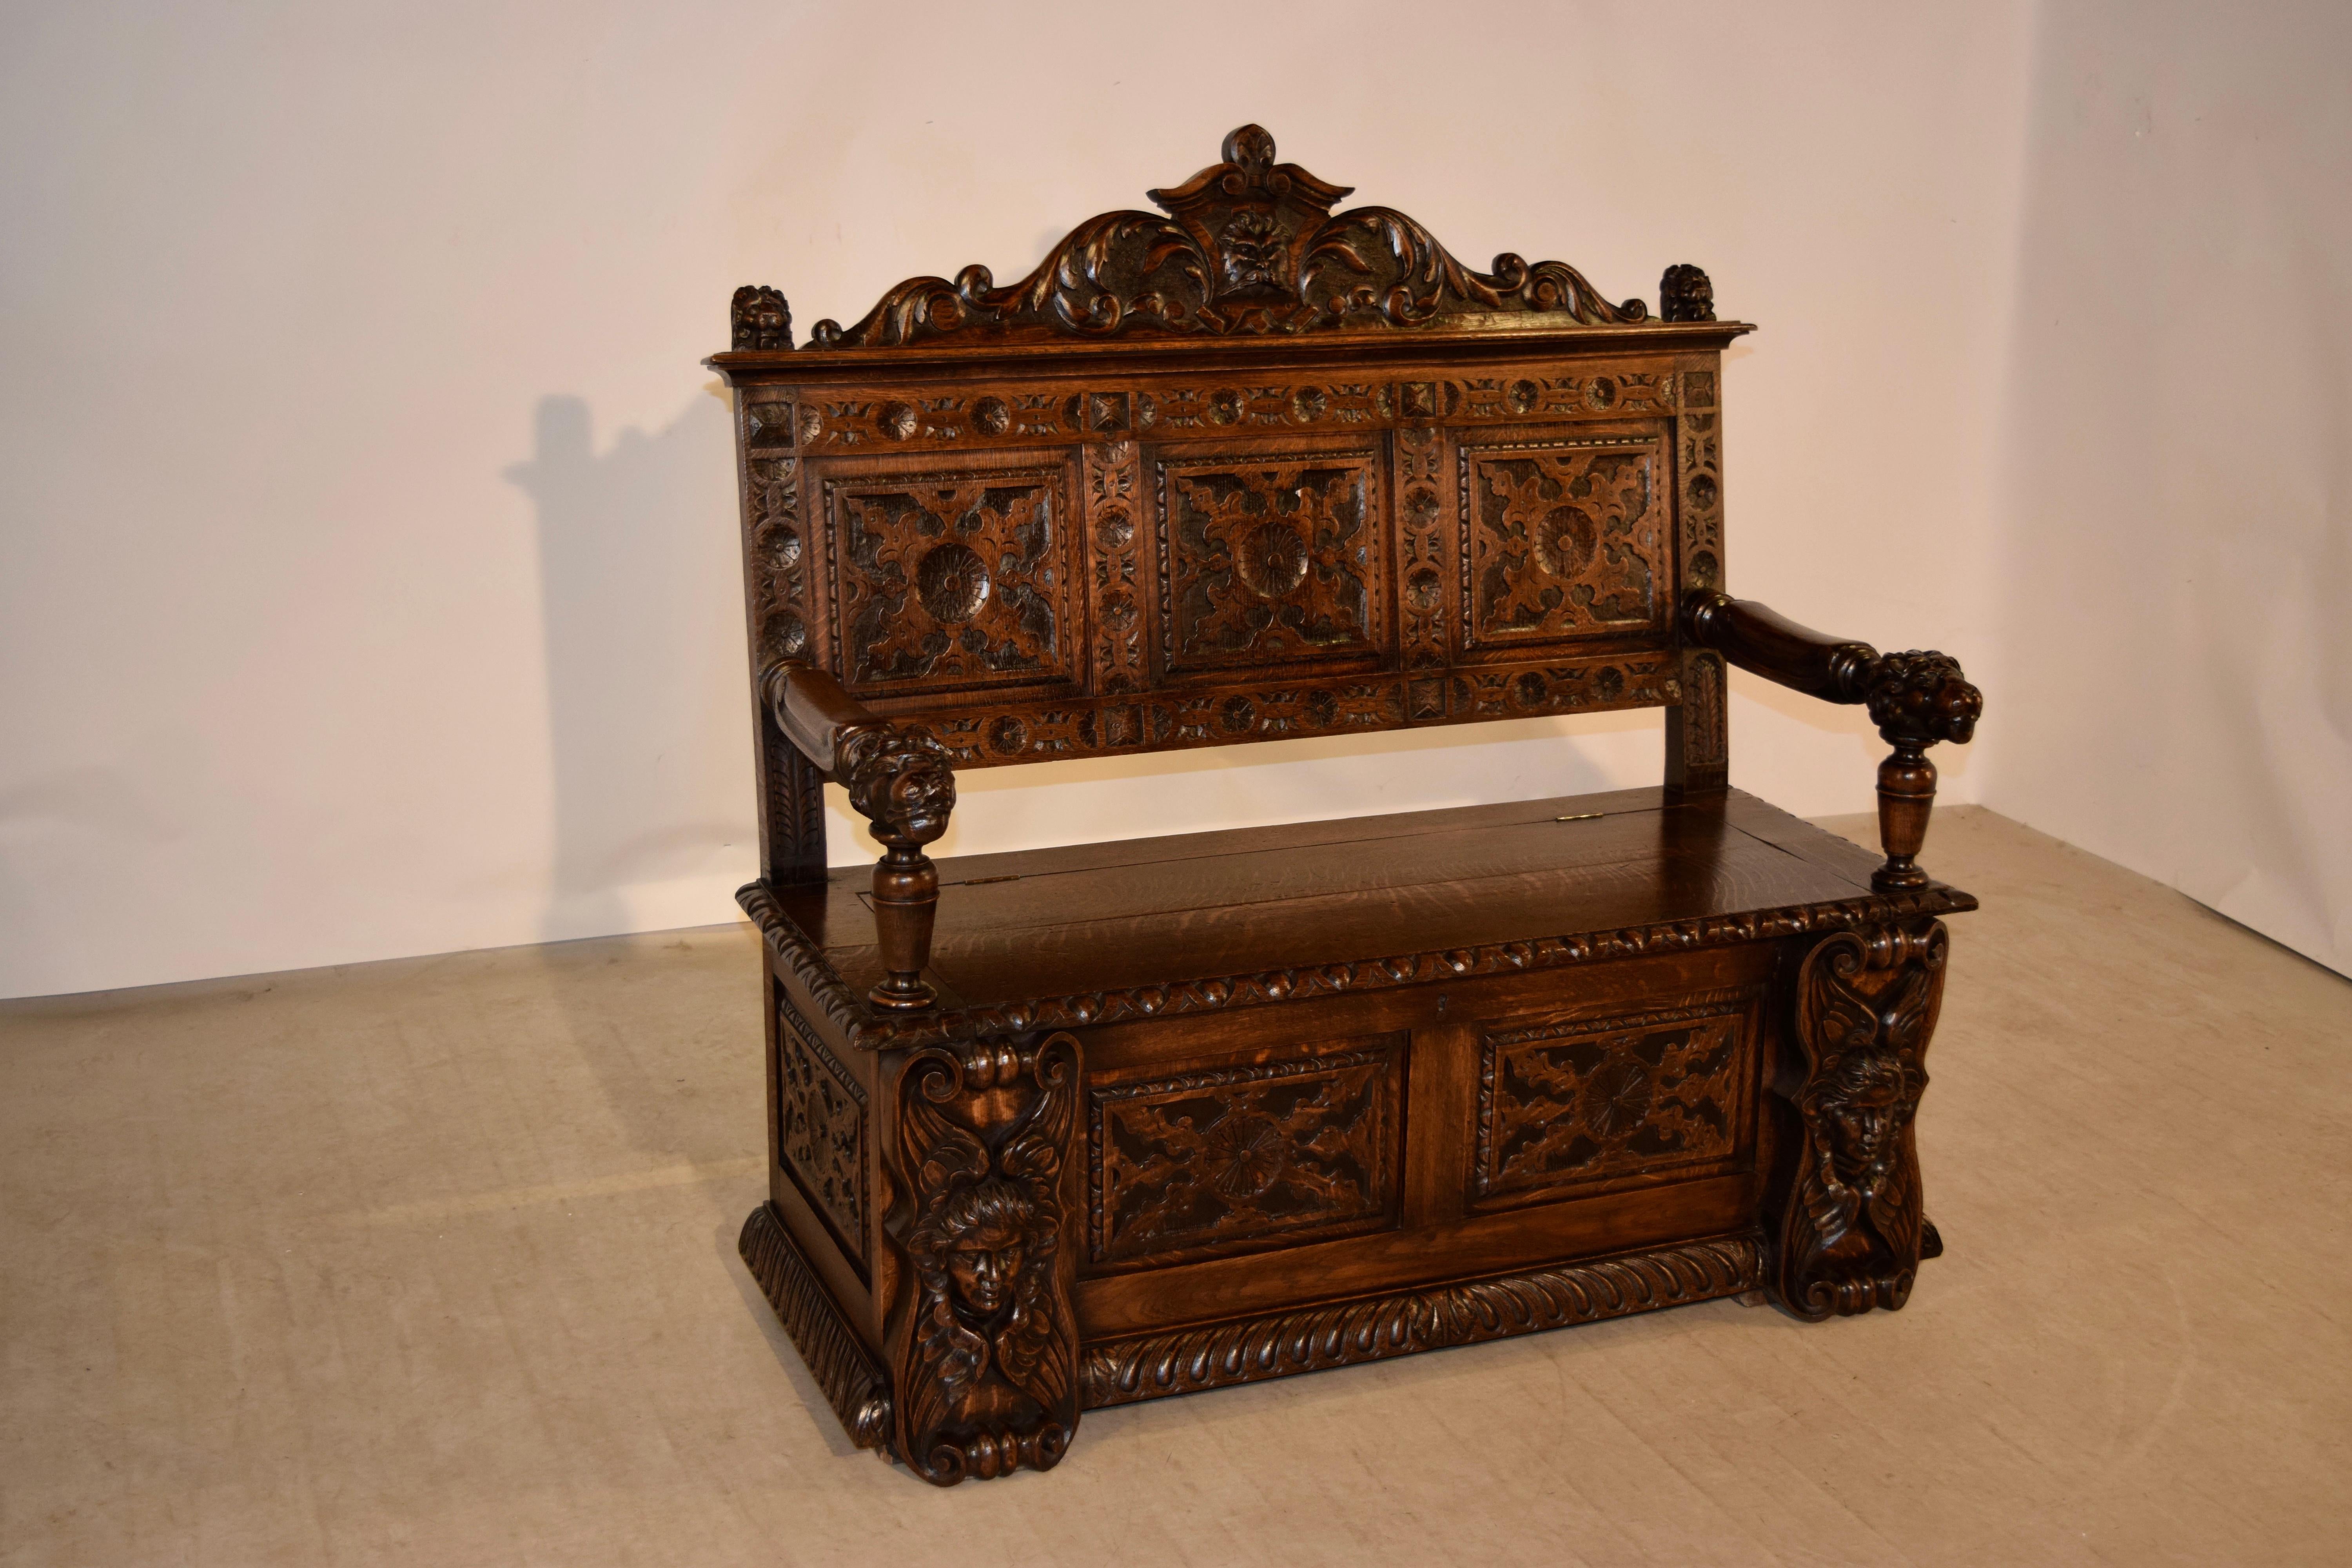 19th century bench from England with a wonderfully hand-carved three-panel back, adorned with a lovely shaped crown, following down to paneled sides and front, which are also hand-carved and are flanked by wonderfully carved angels. This piece has a